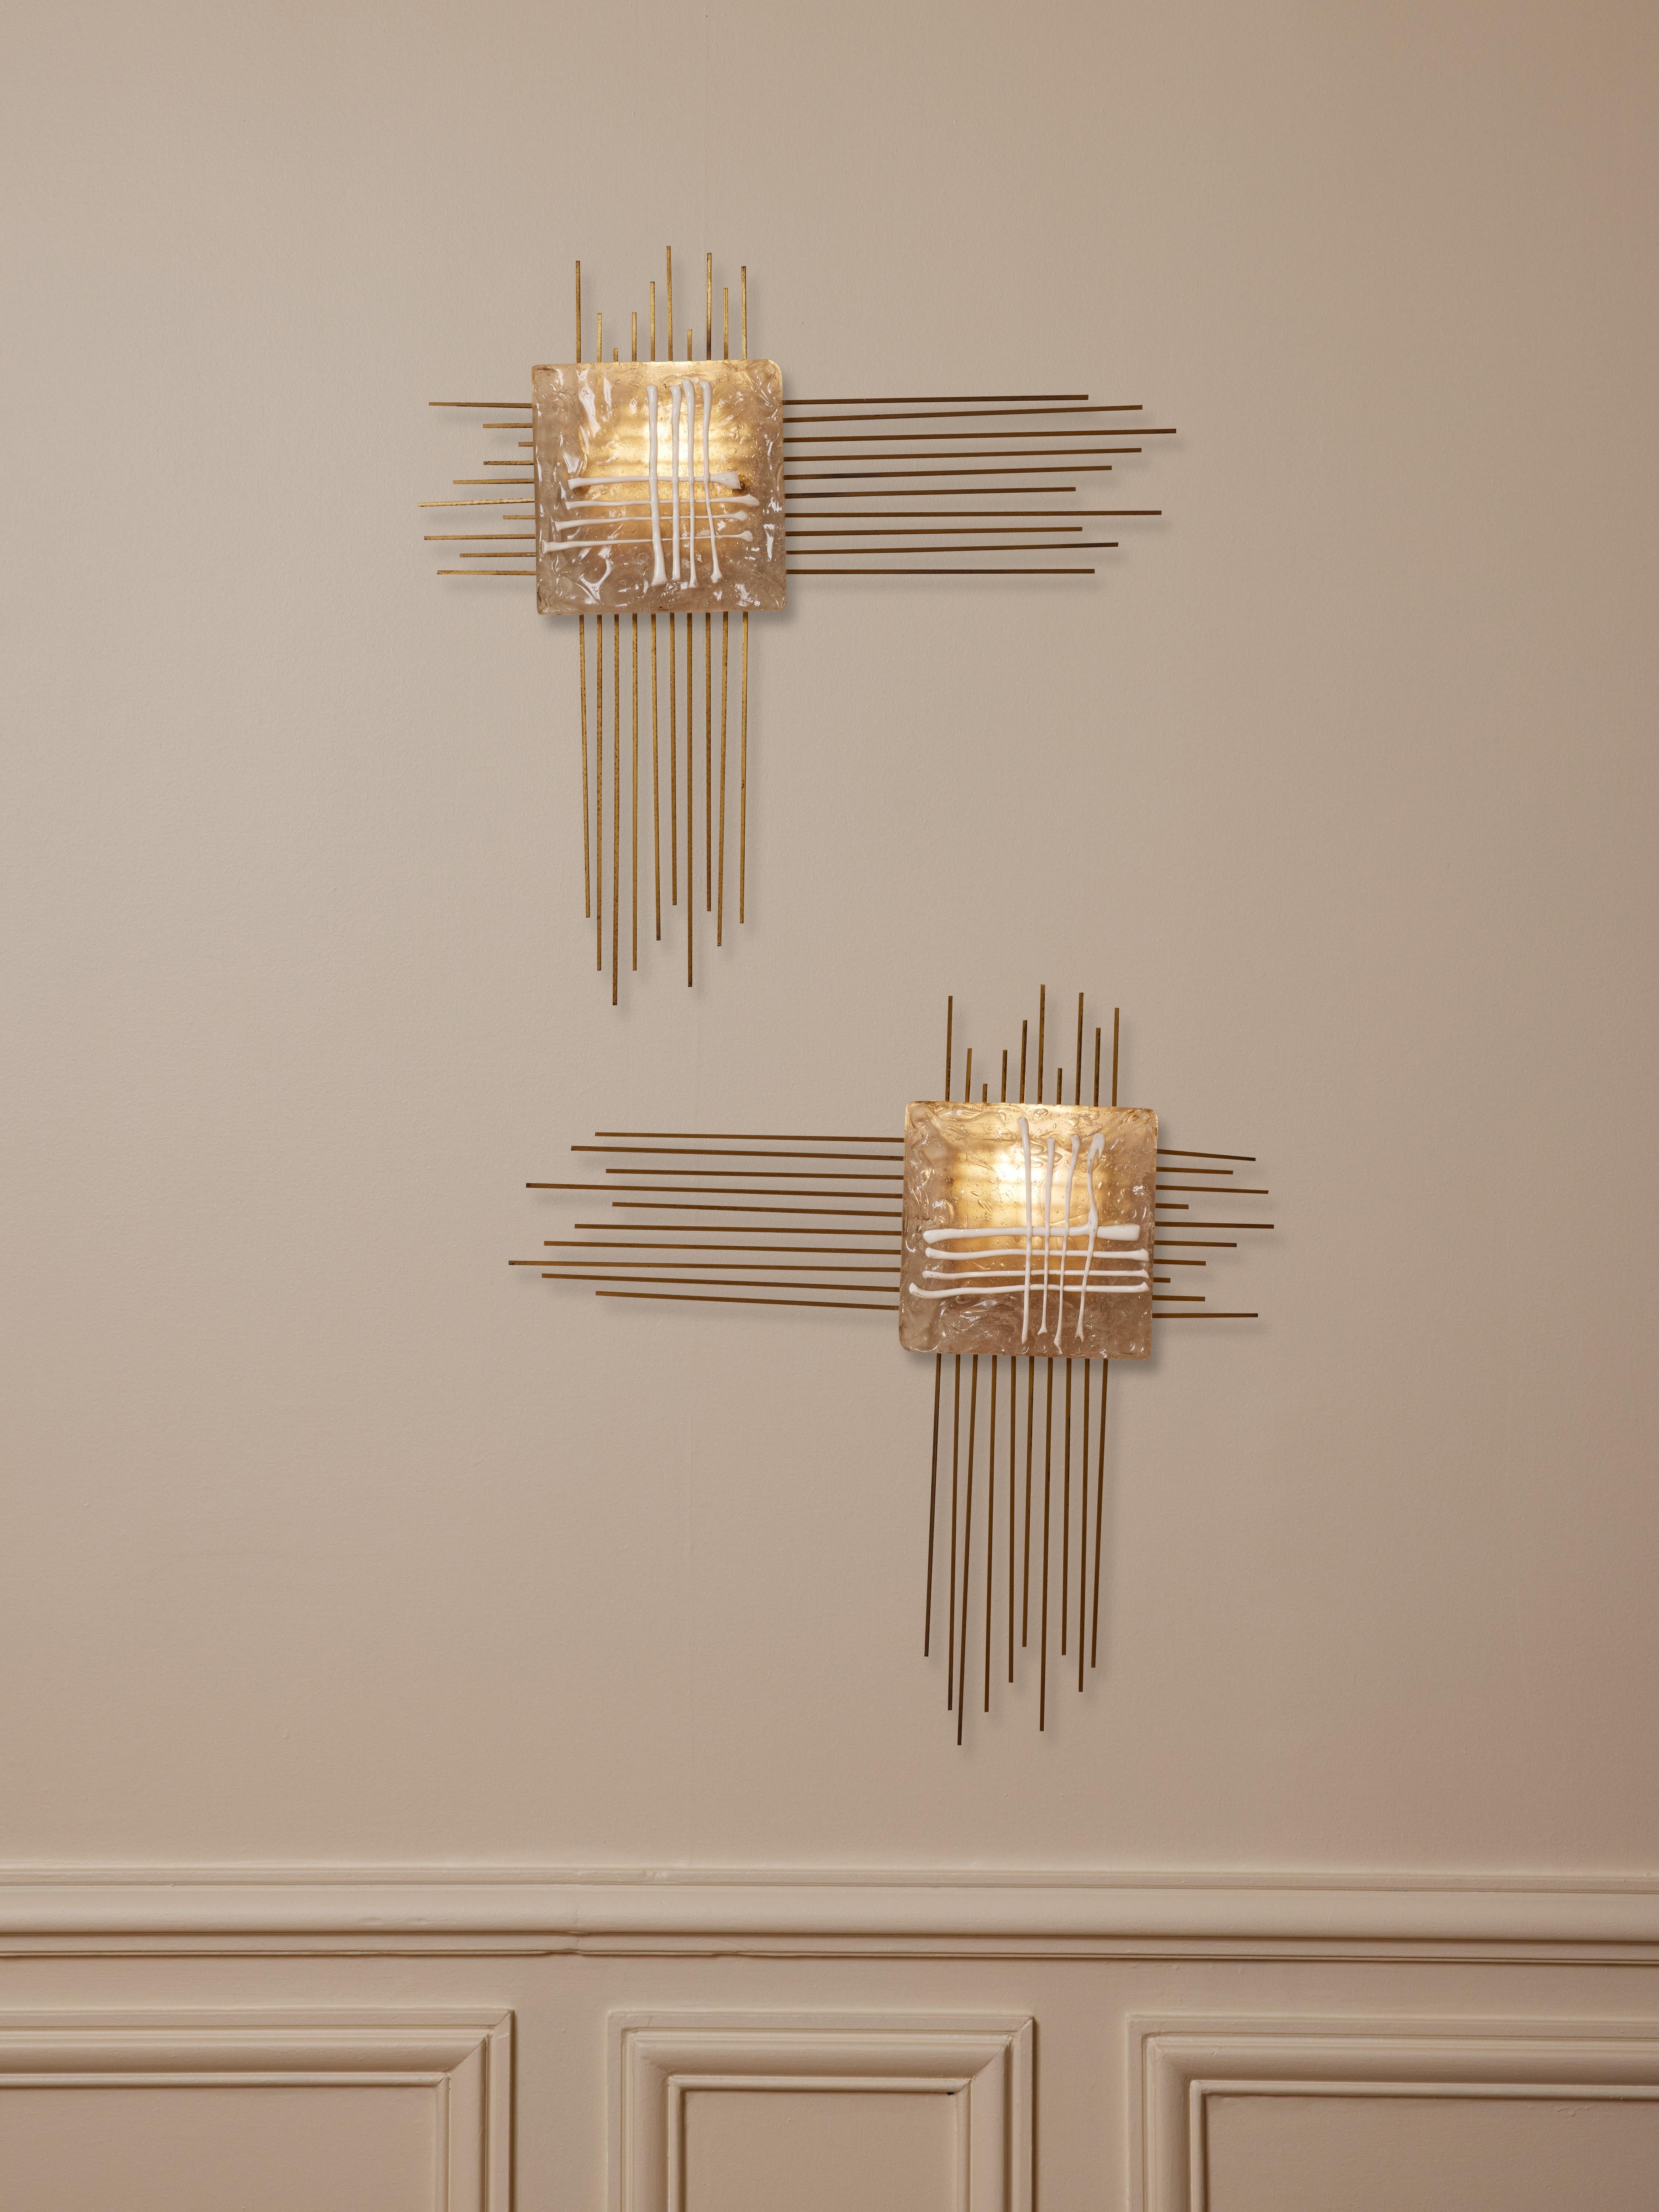 Rare vintage wall lights in brass and Murano glass by Angelo Brotto for Esperia.
Italy, 1960.